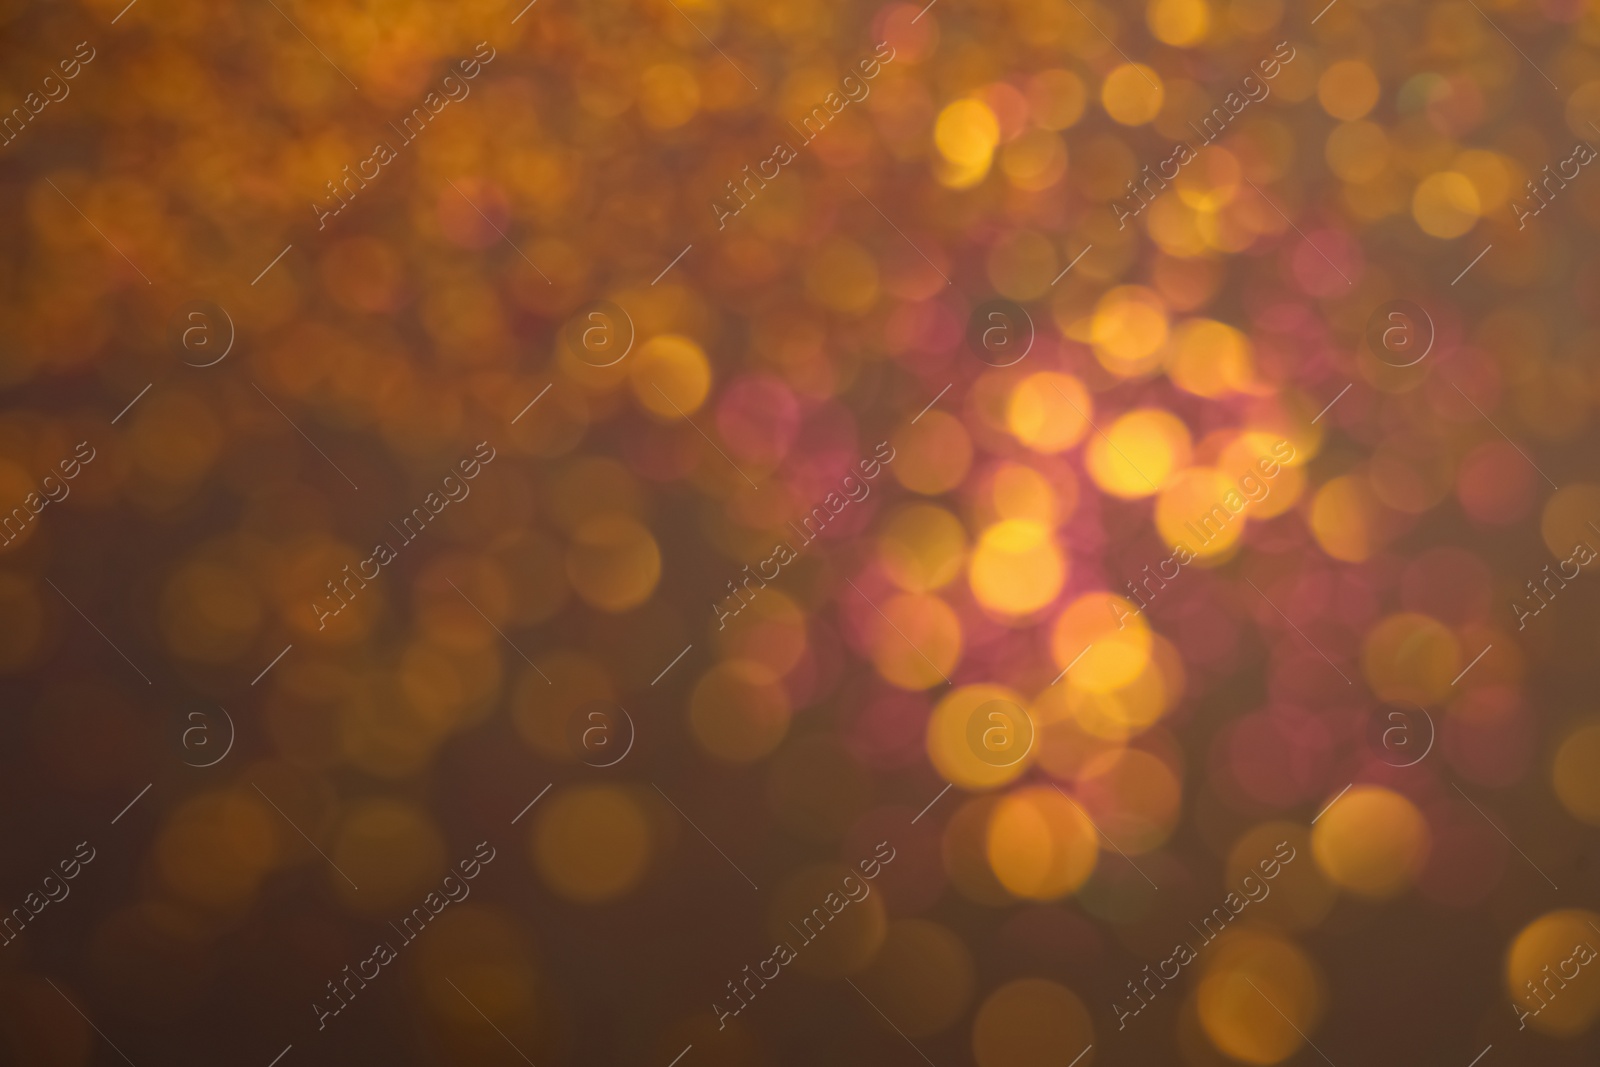 Photo of Blurred view of shiny lights as background. Bokeh effect